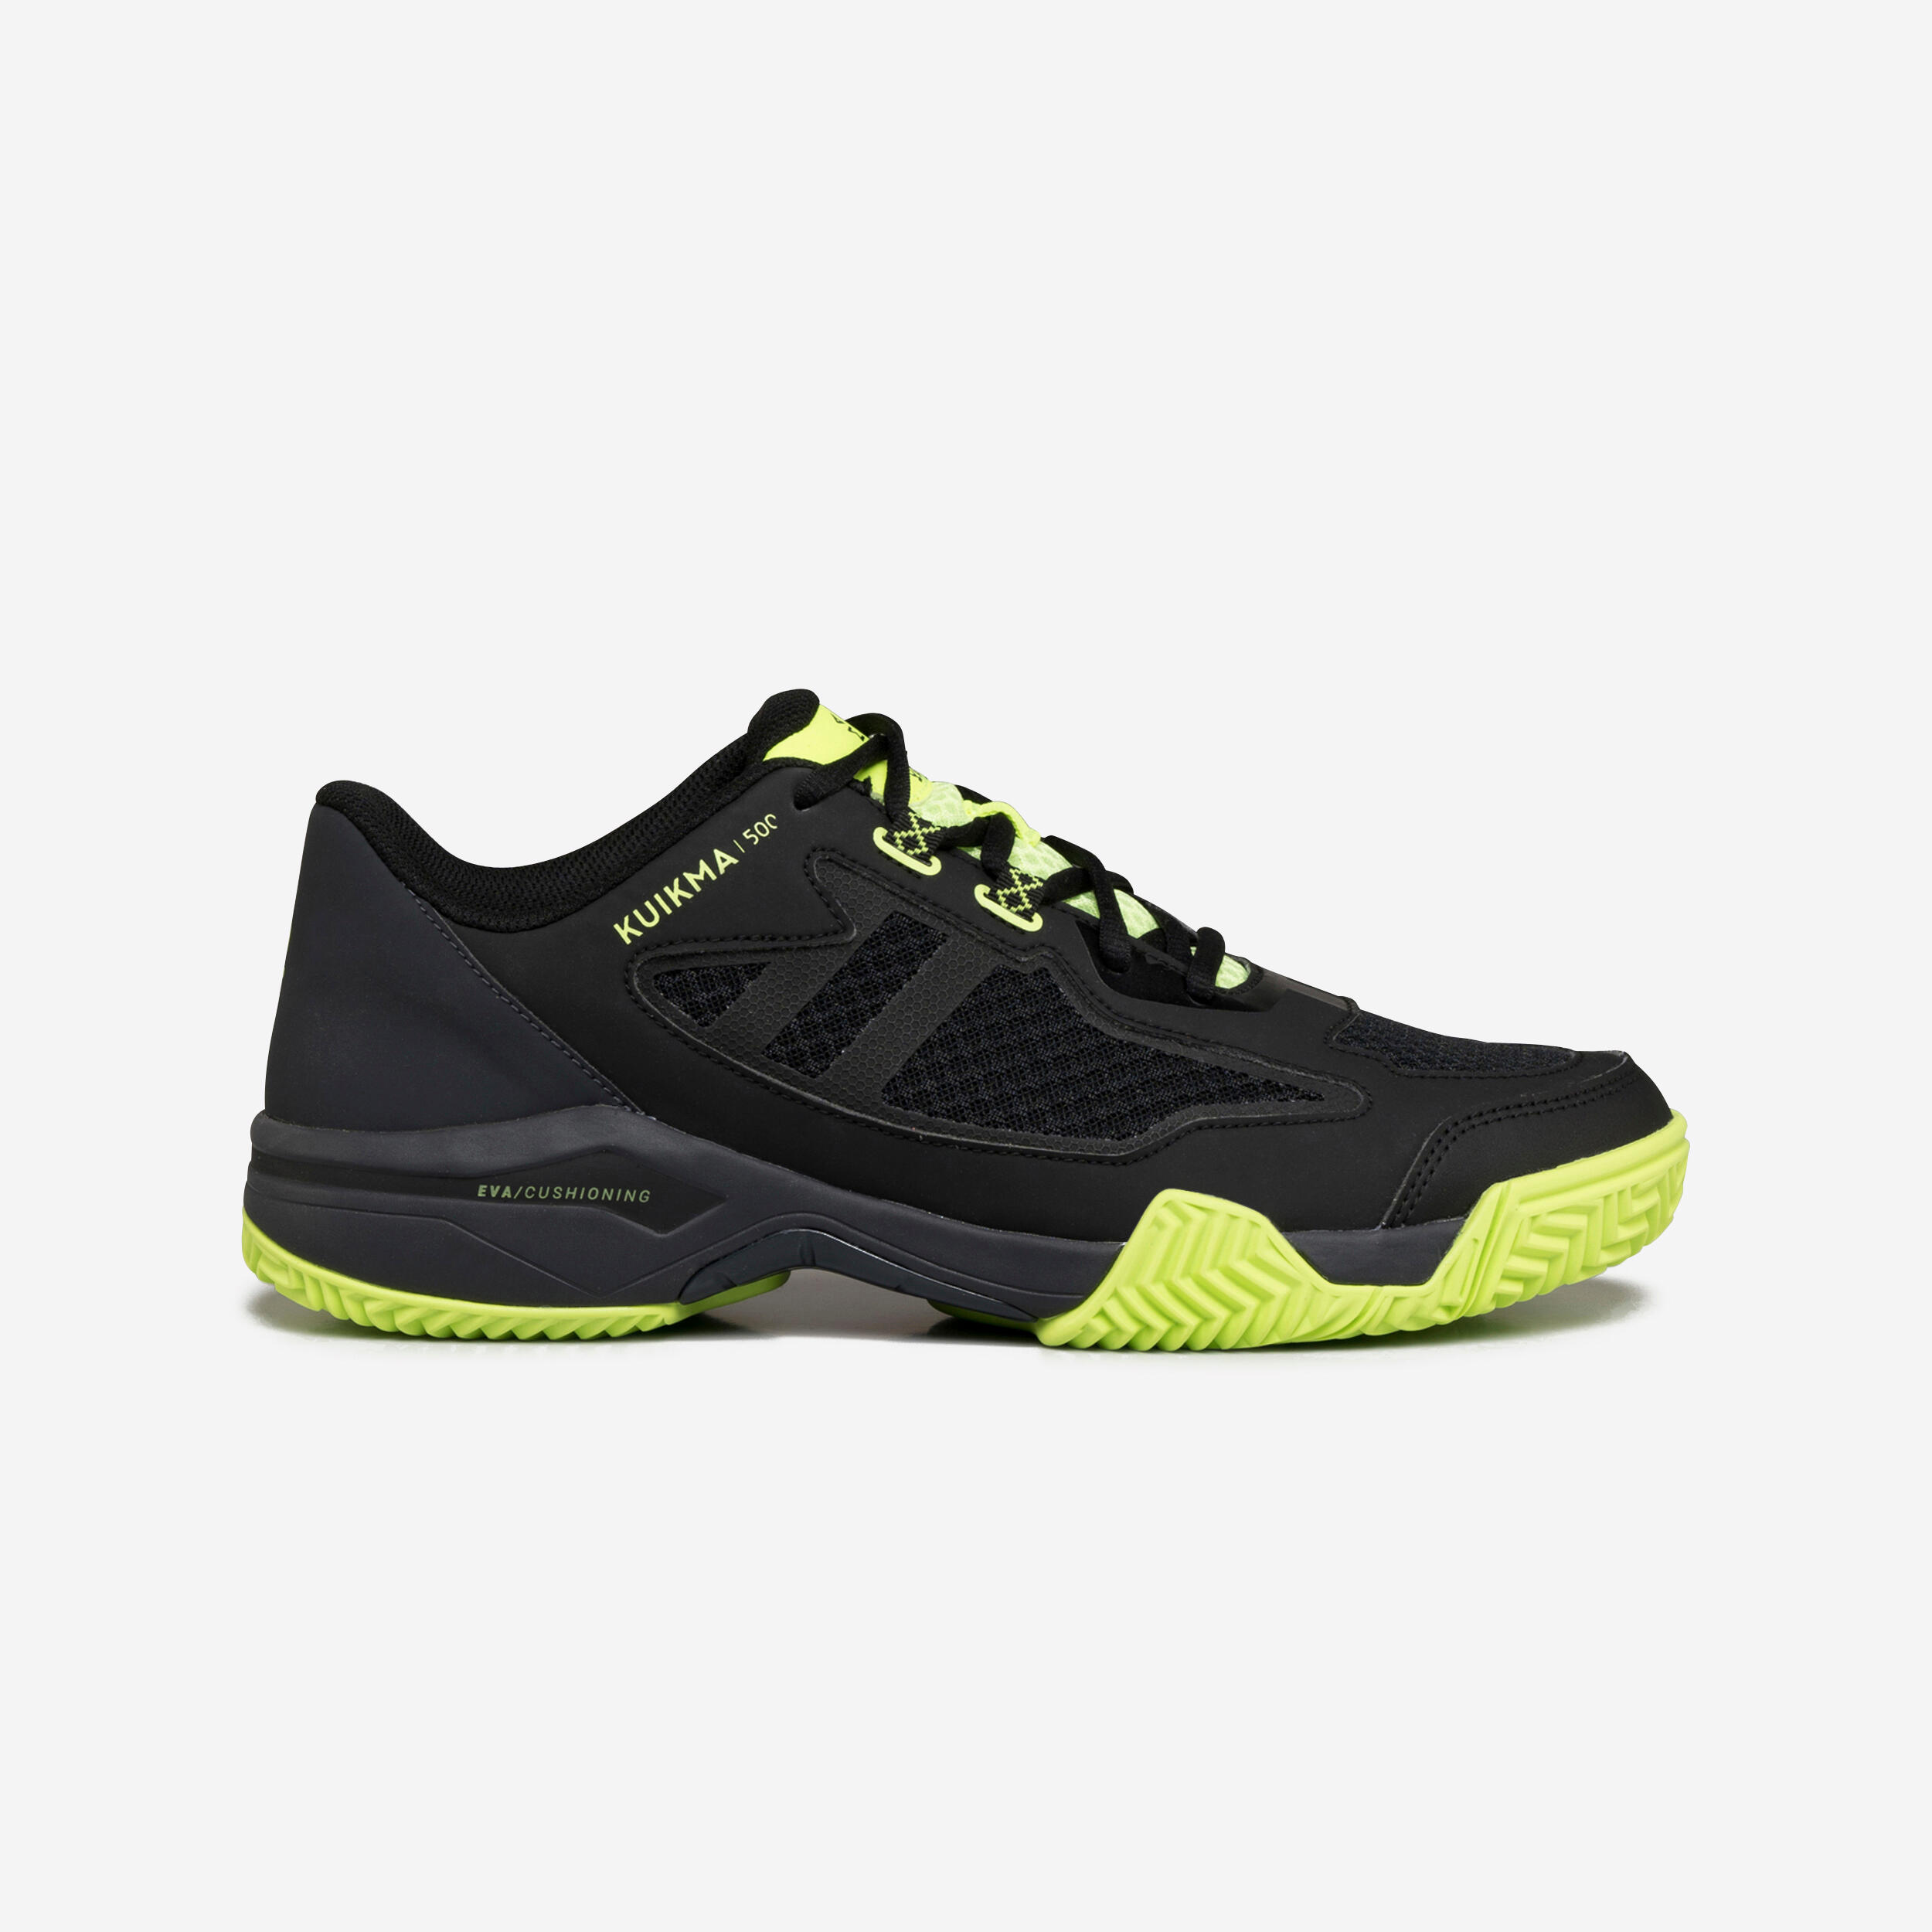 smoked black / fluo lime yellow